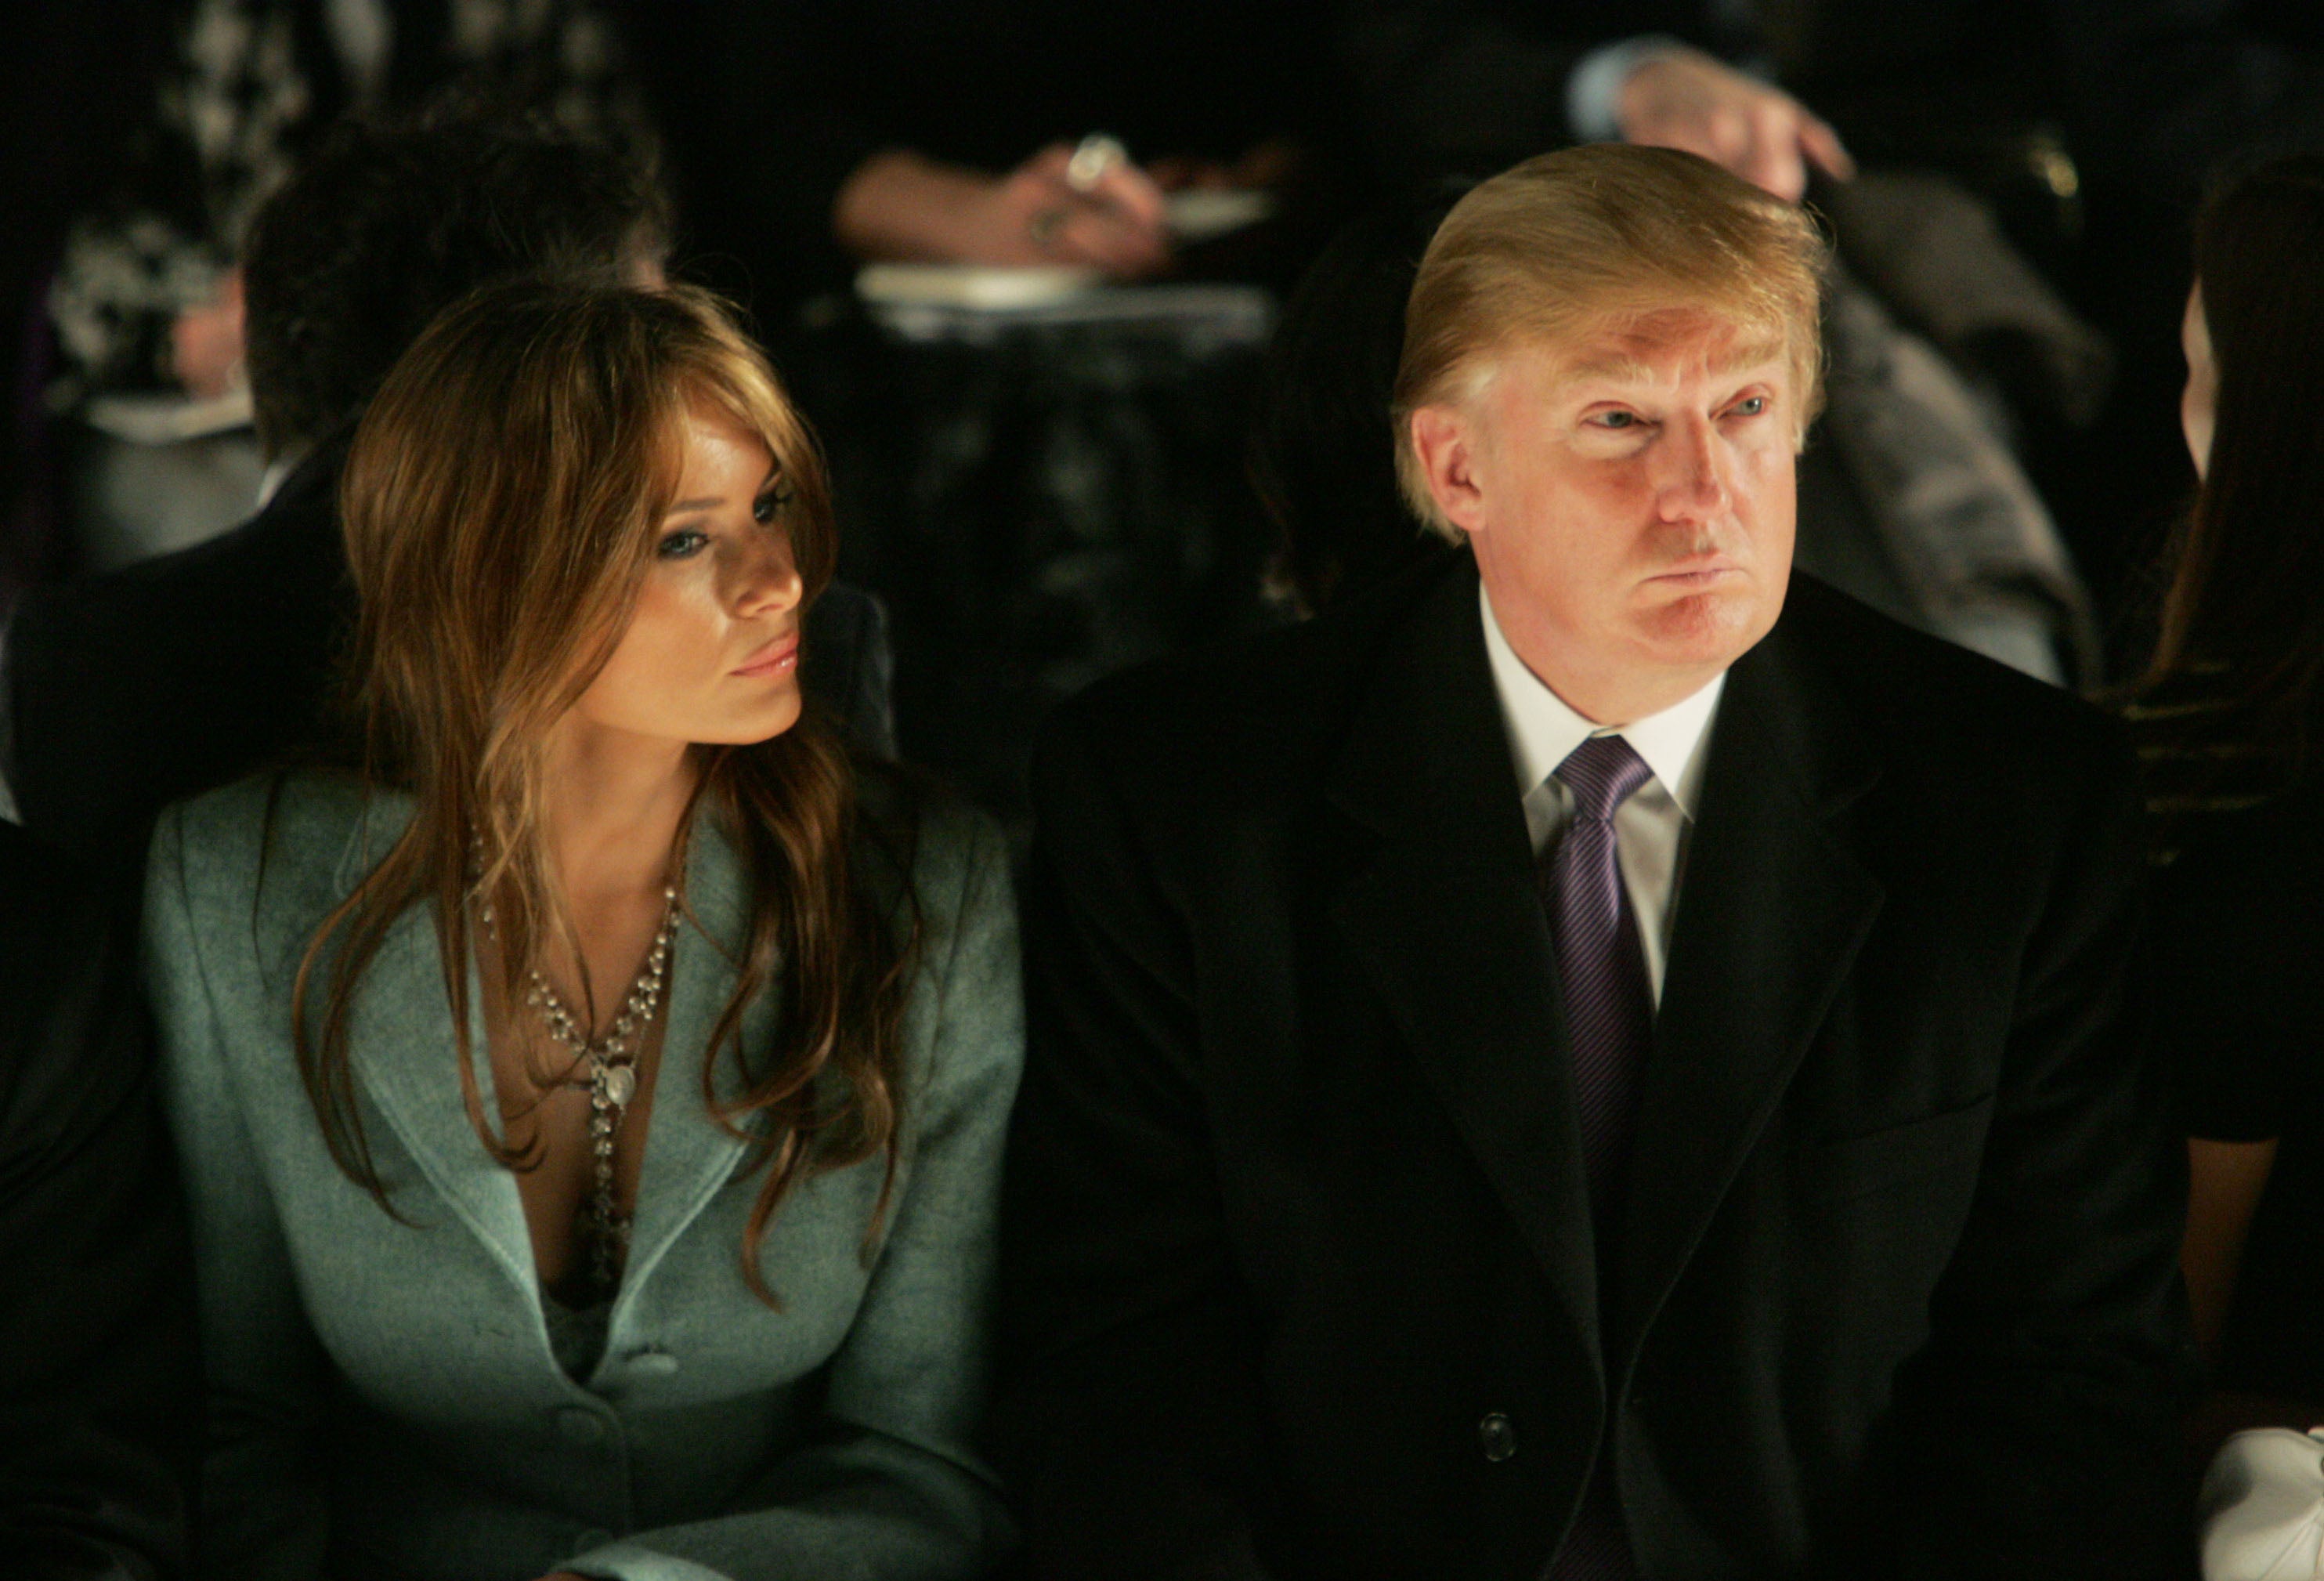 Donald and Melania Trump attend the Michael Kors show during Olympus Fashion Week at Bryant Park in New York on 9 February 2005